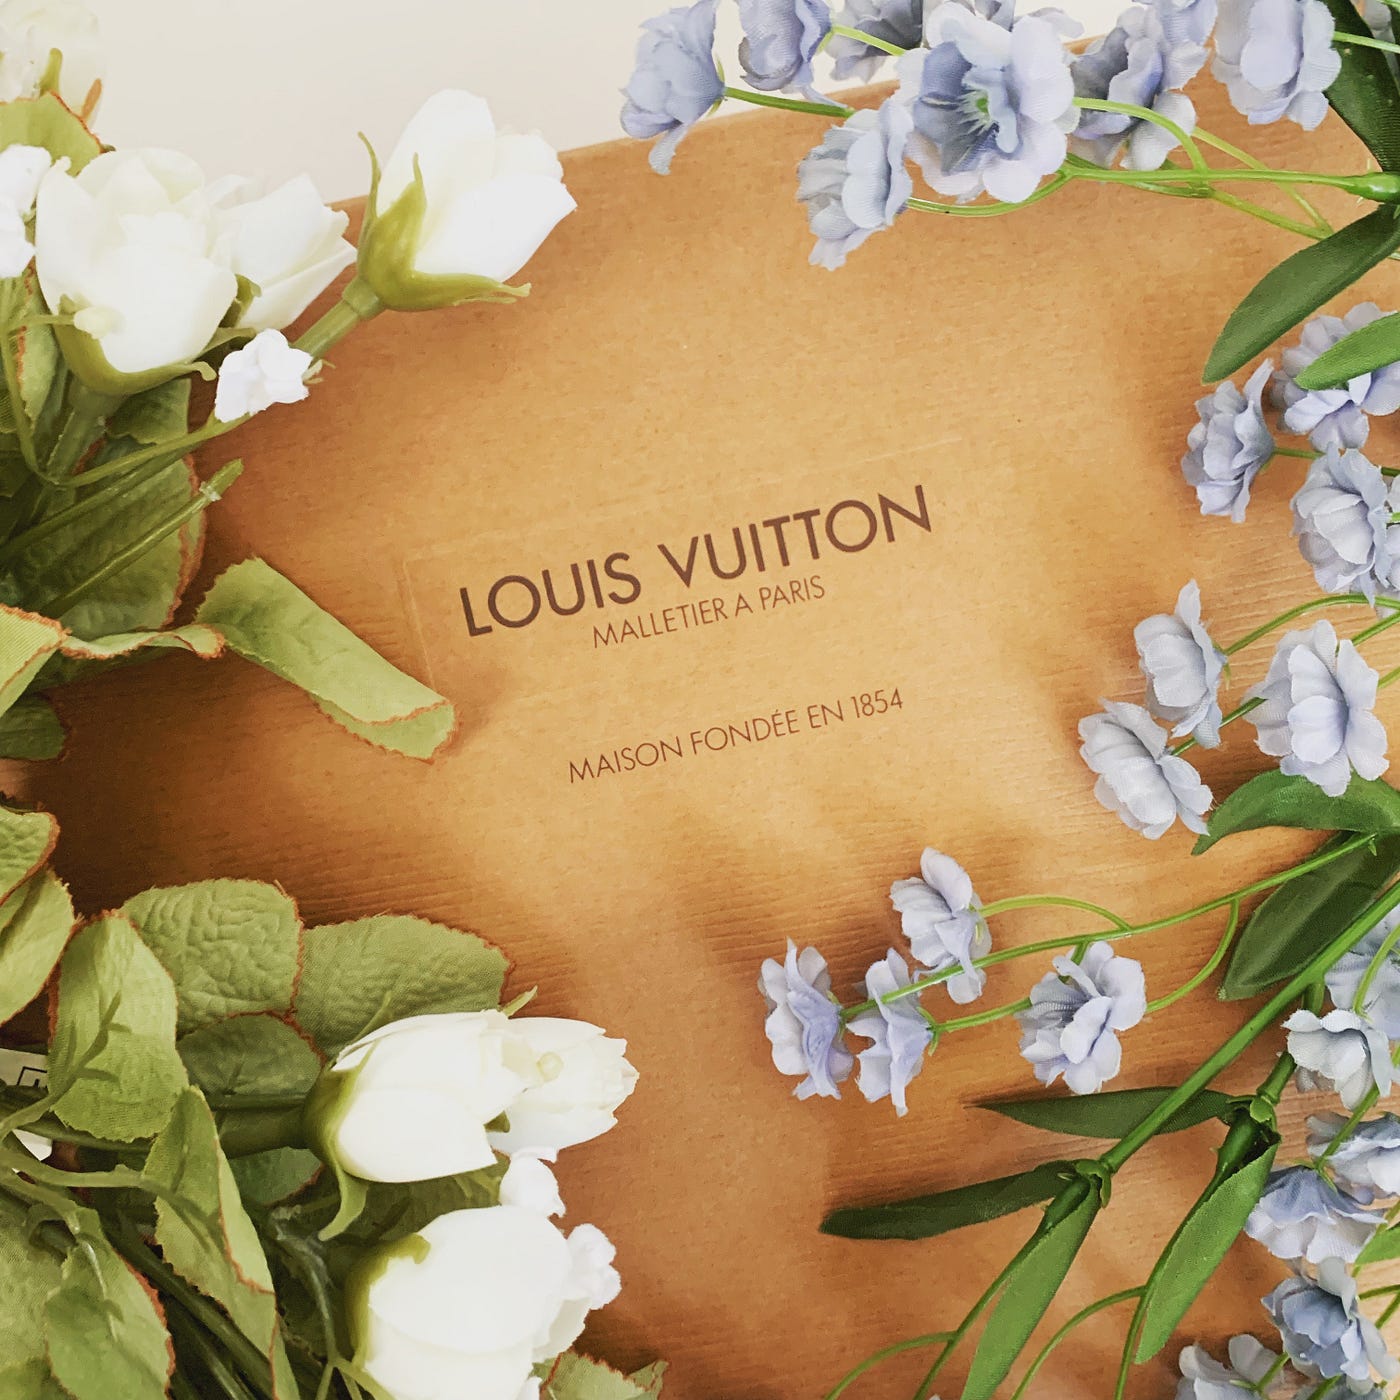 Louis Vuitton's 15 Marketing & Business Strategies to Learn From